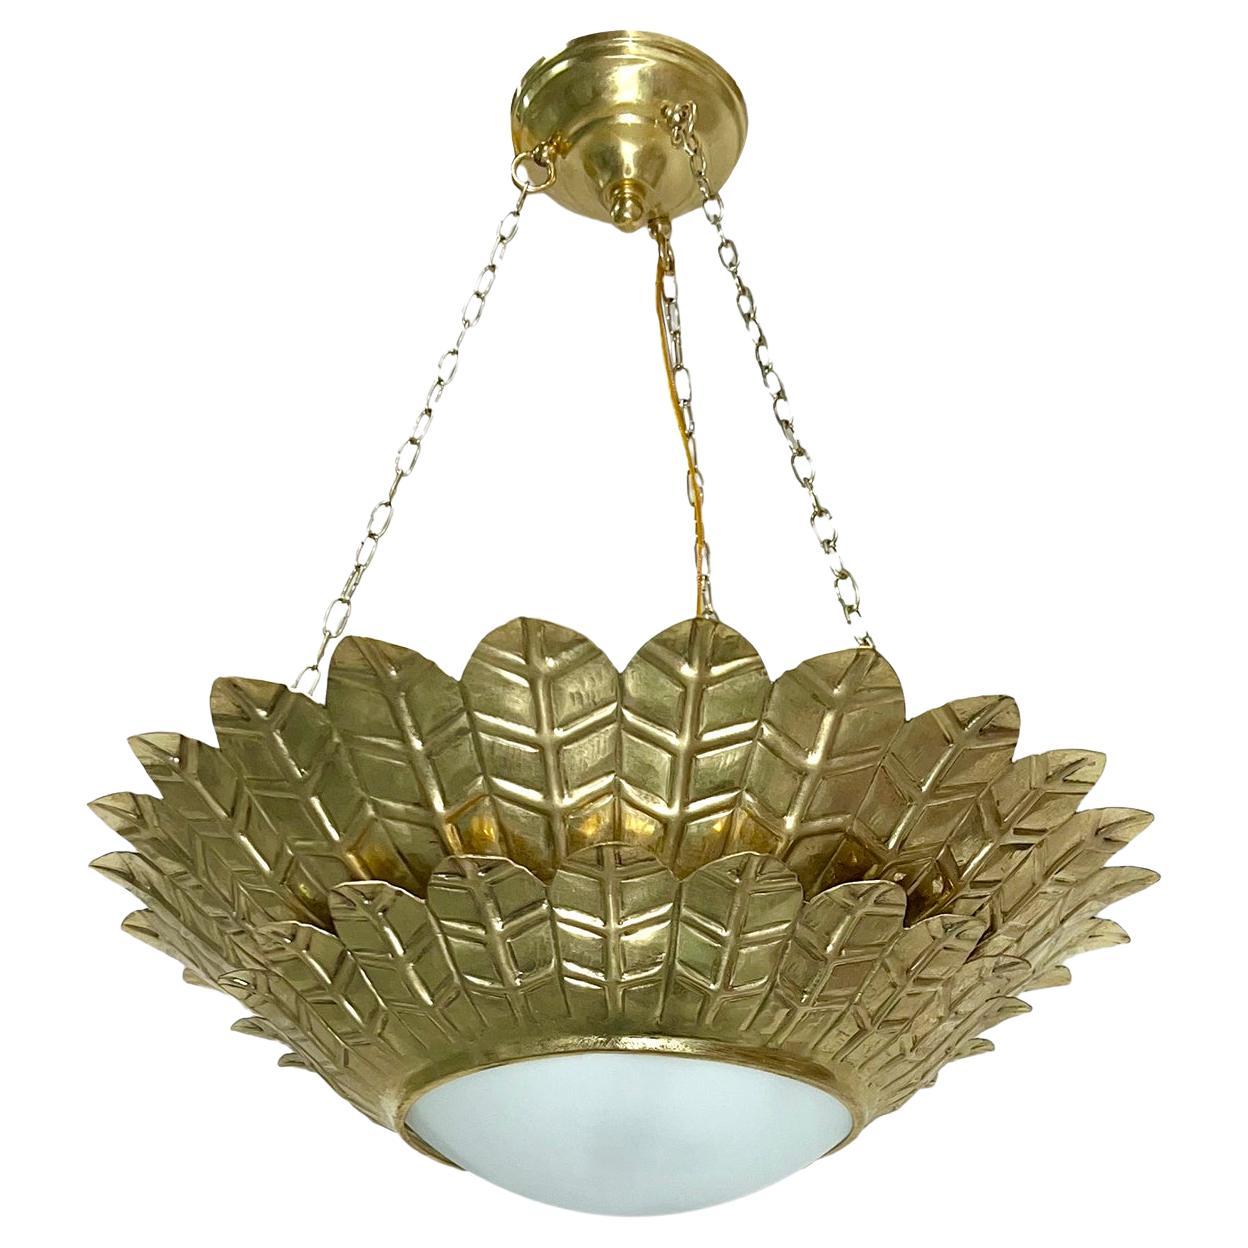 Set of Gilt Sunburst Double-Tiered Light Fixtures. Sold Individually For Sale